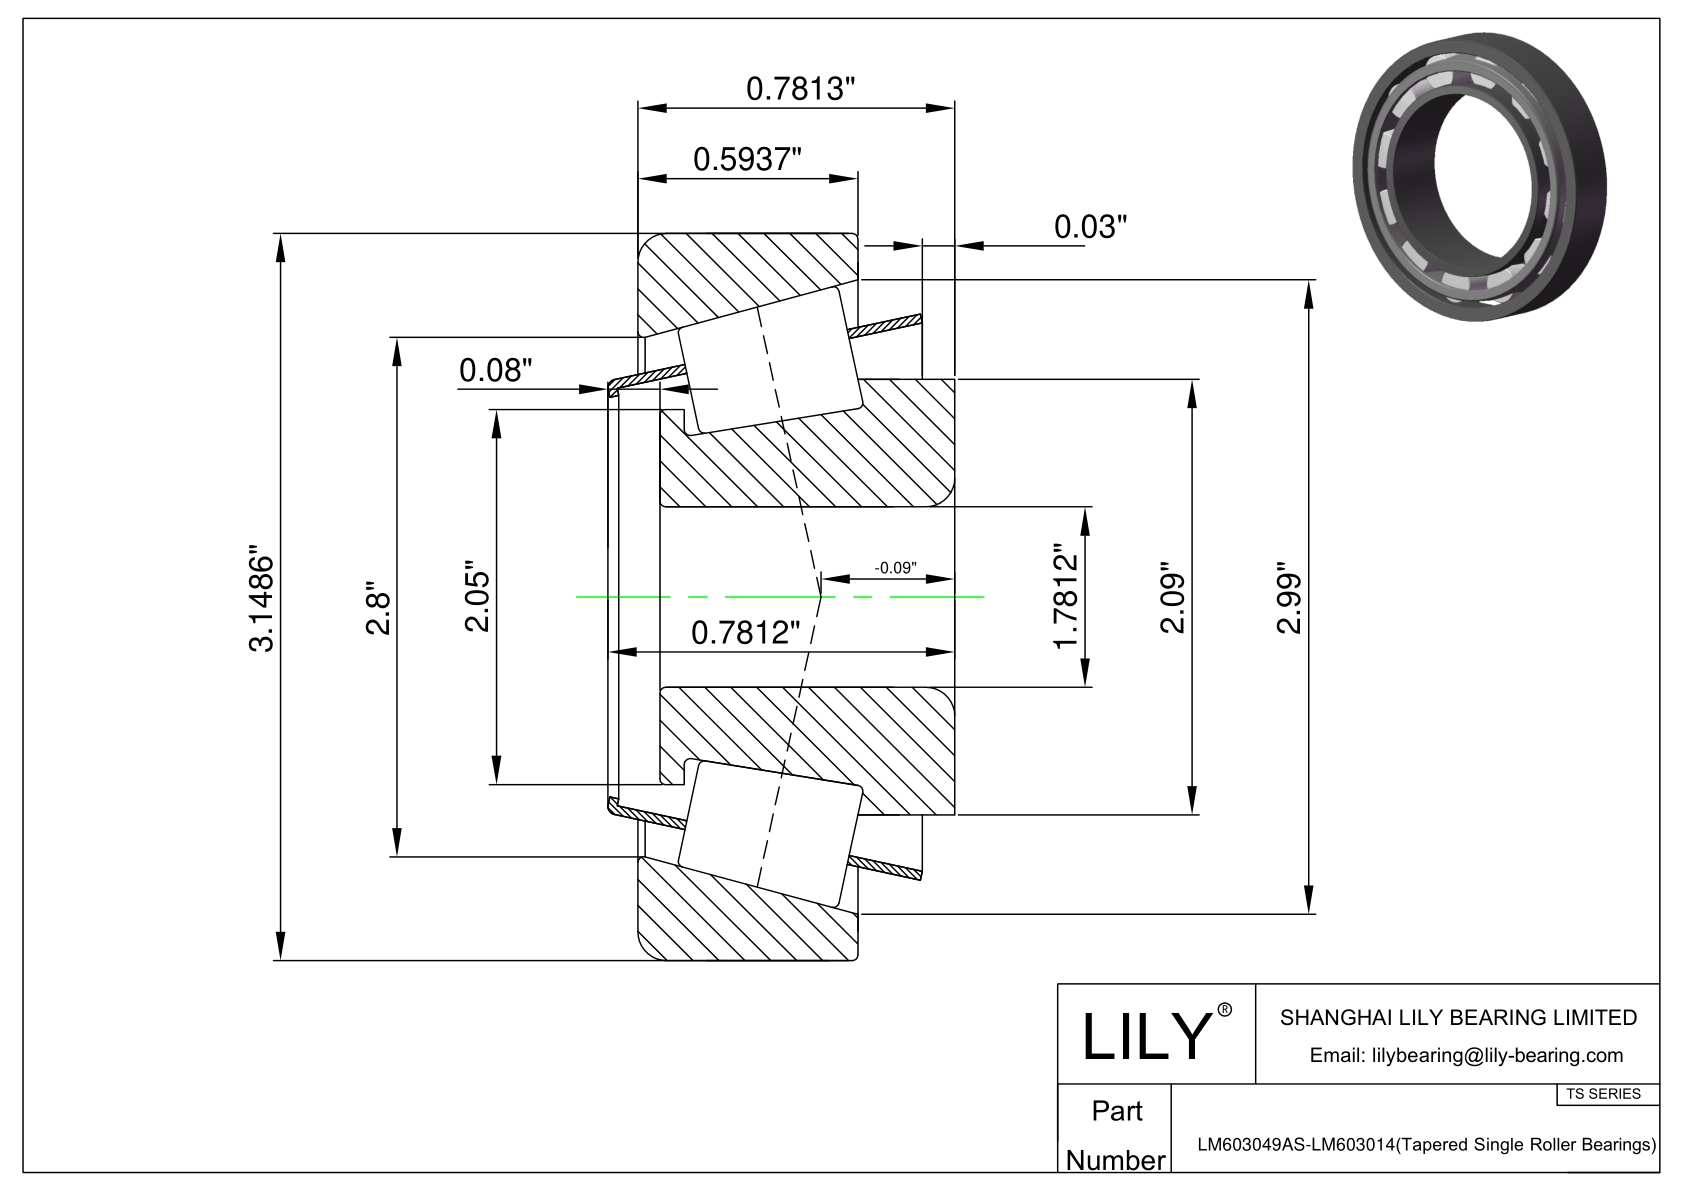 LM603049AS-LM603014 TS (Tapered Single Roller Bearings) (Imperial) cad drawing